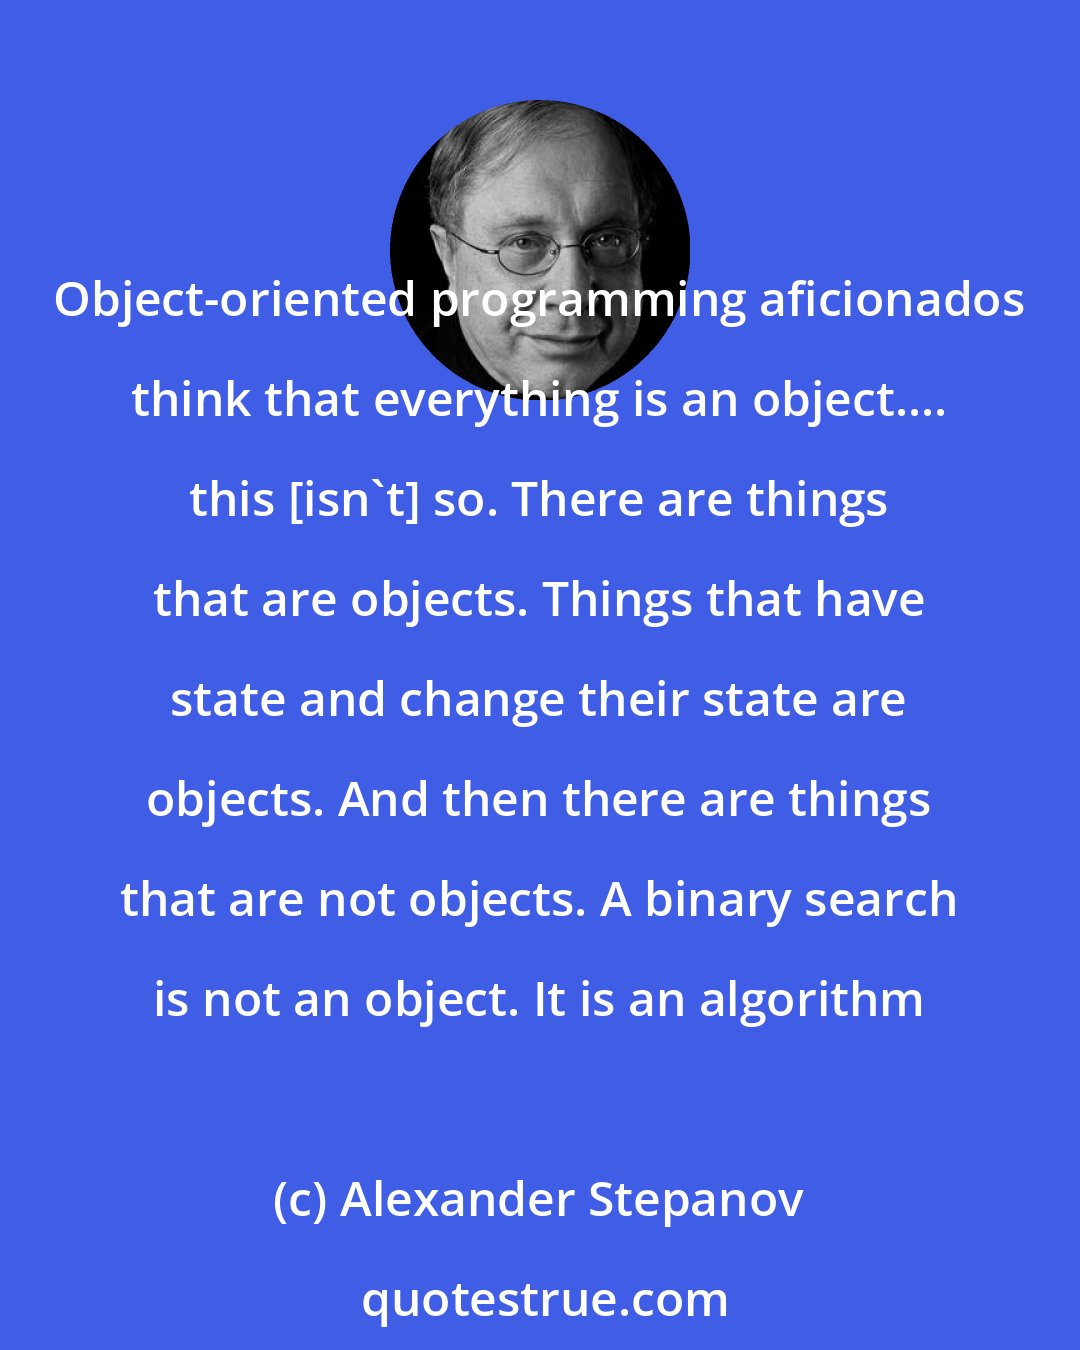 Alexander Stepanov: Object-oriented programming aficionados think that everything is an object.... this [isn't] so. There are things that are objects. Things that have state and change their state are objects. And then there are things that are not objects. A binary search is not an object. It is an algorithm